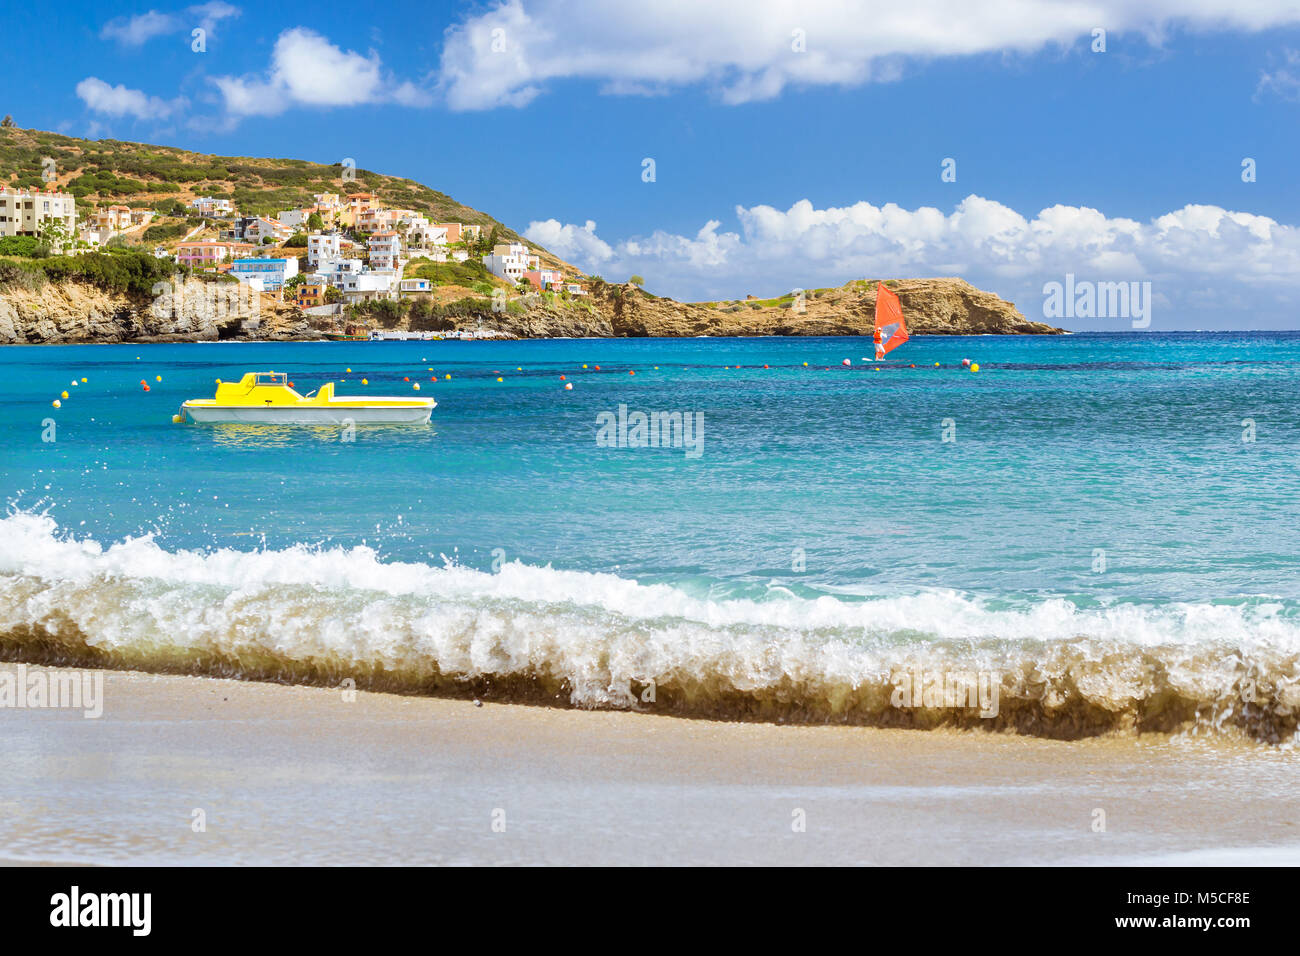 Windsurf with red sail rides on sea on background rocky shore. View from sunny Livadi beach in resort village Bali. Rethymno, Crete Greece. Extreme wa Stock Photo